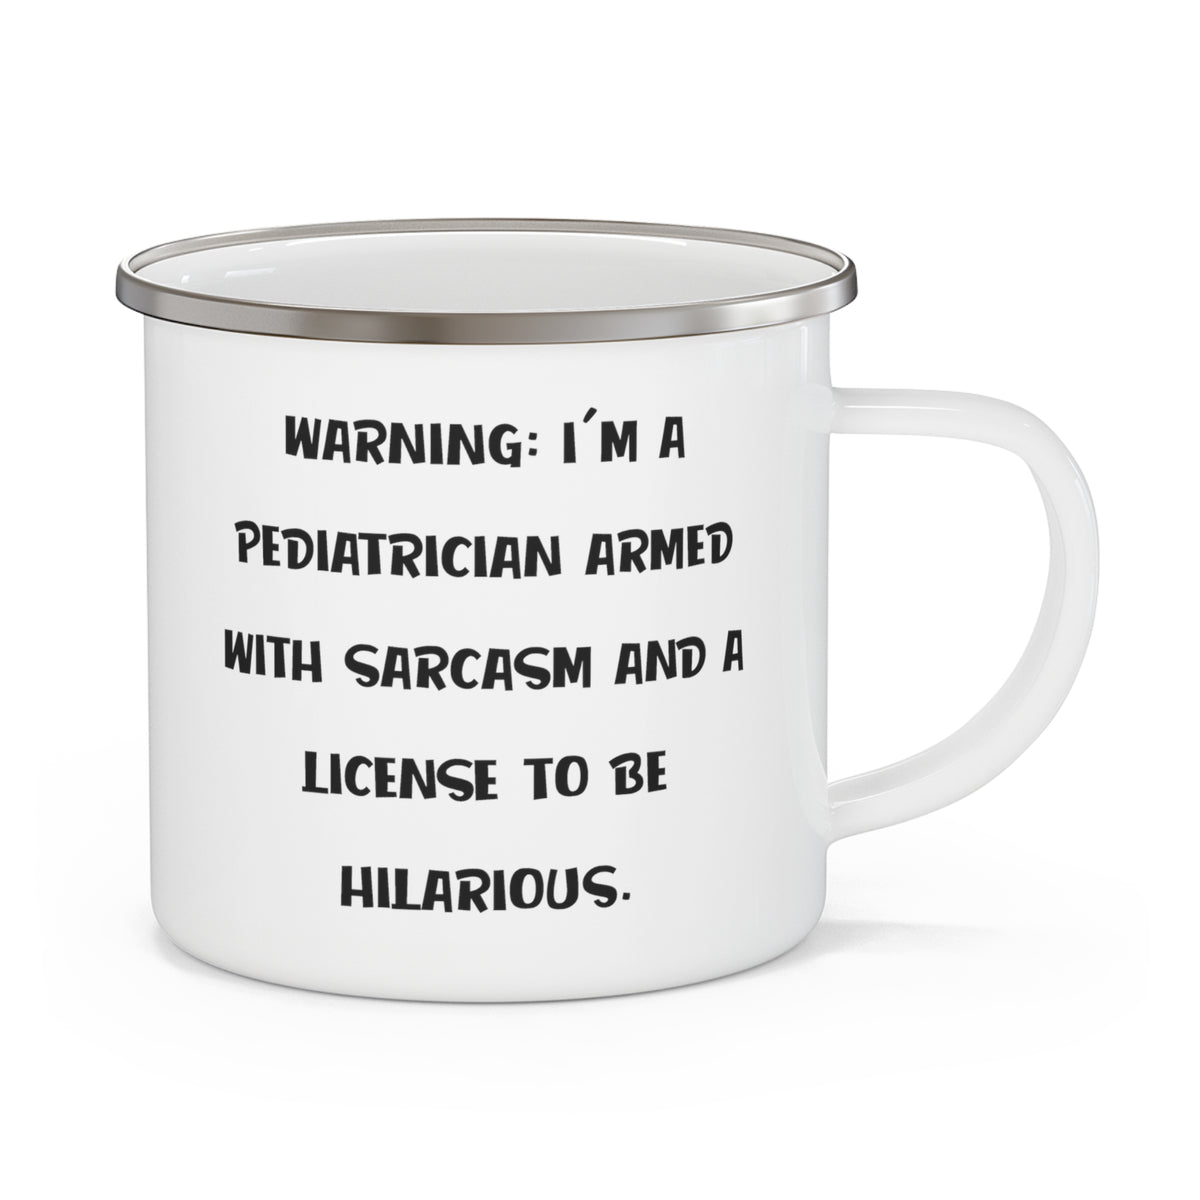 WARNING: I'M A PEDIATRICIAN ARMED. Pediatrician 12oz Camper Mug, Motivational Pediatrician Gifts, For Coworkers from Team Leader, Gifts for coworkers under, Gifts for female coworkers, Gifts for male